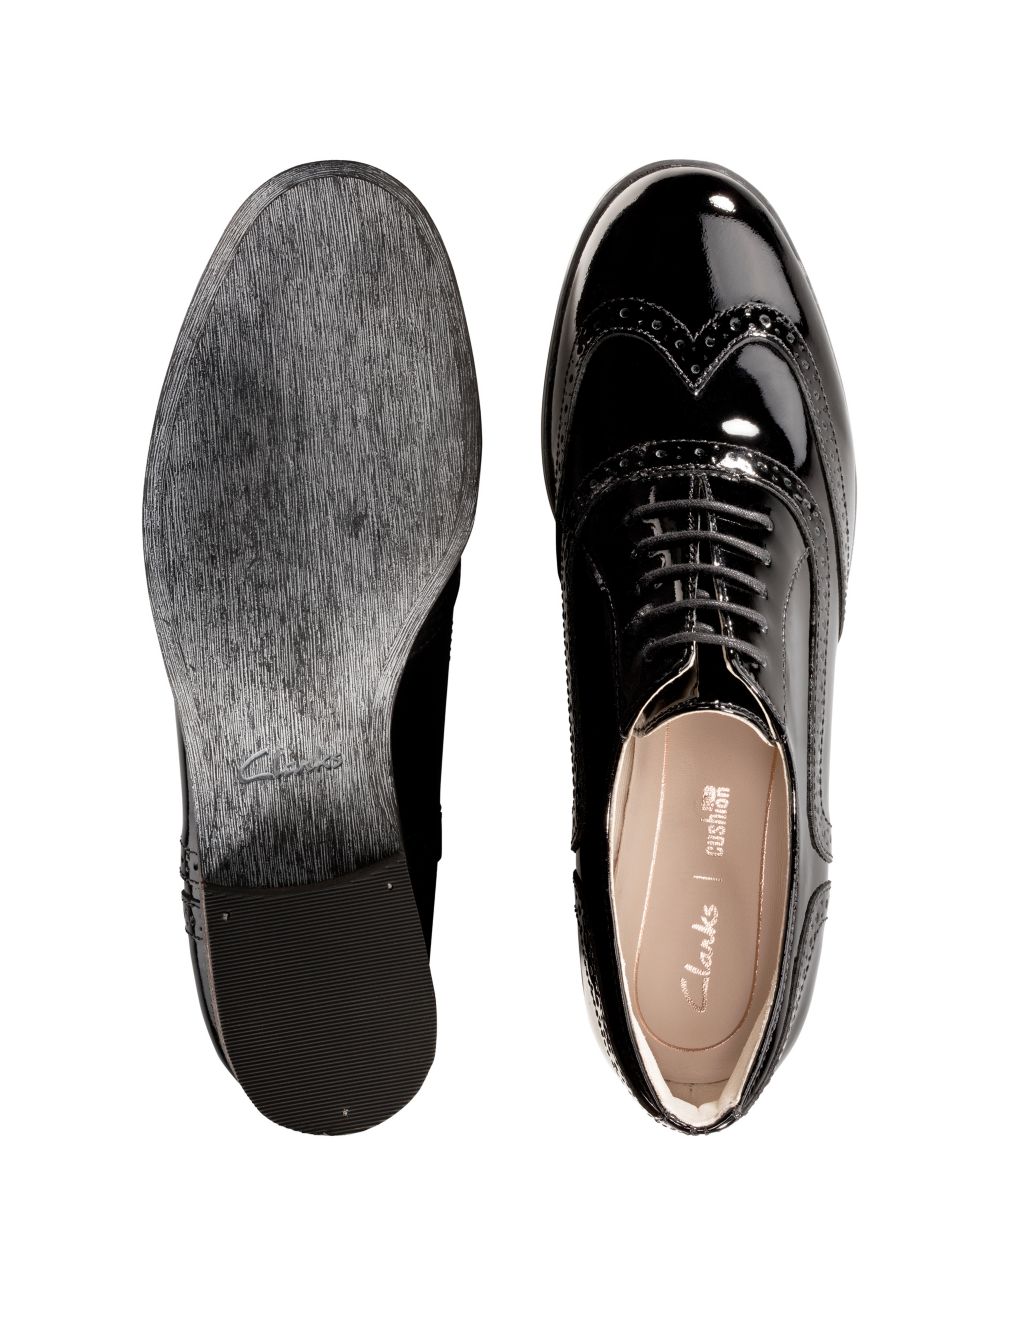 Wide Fit Leather Patent Brogues image 7